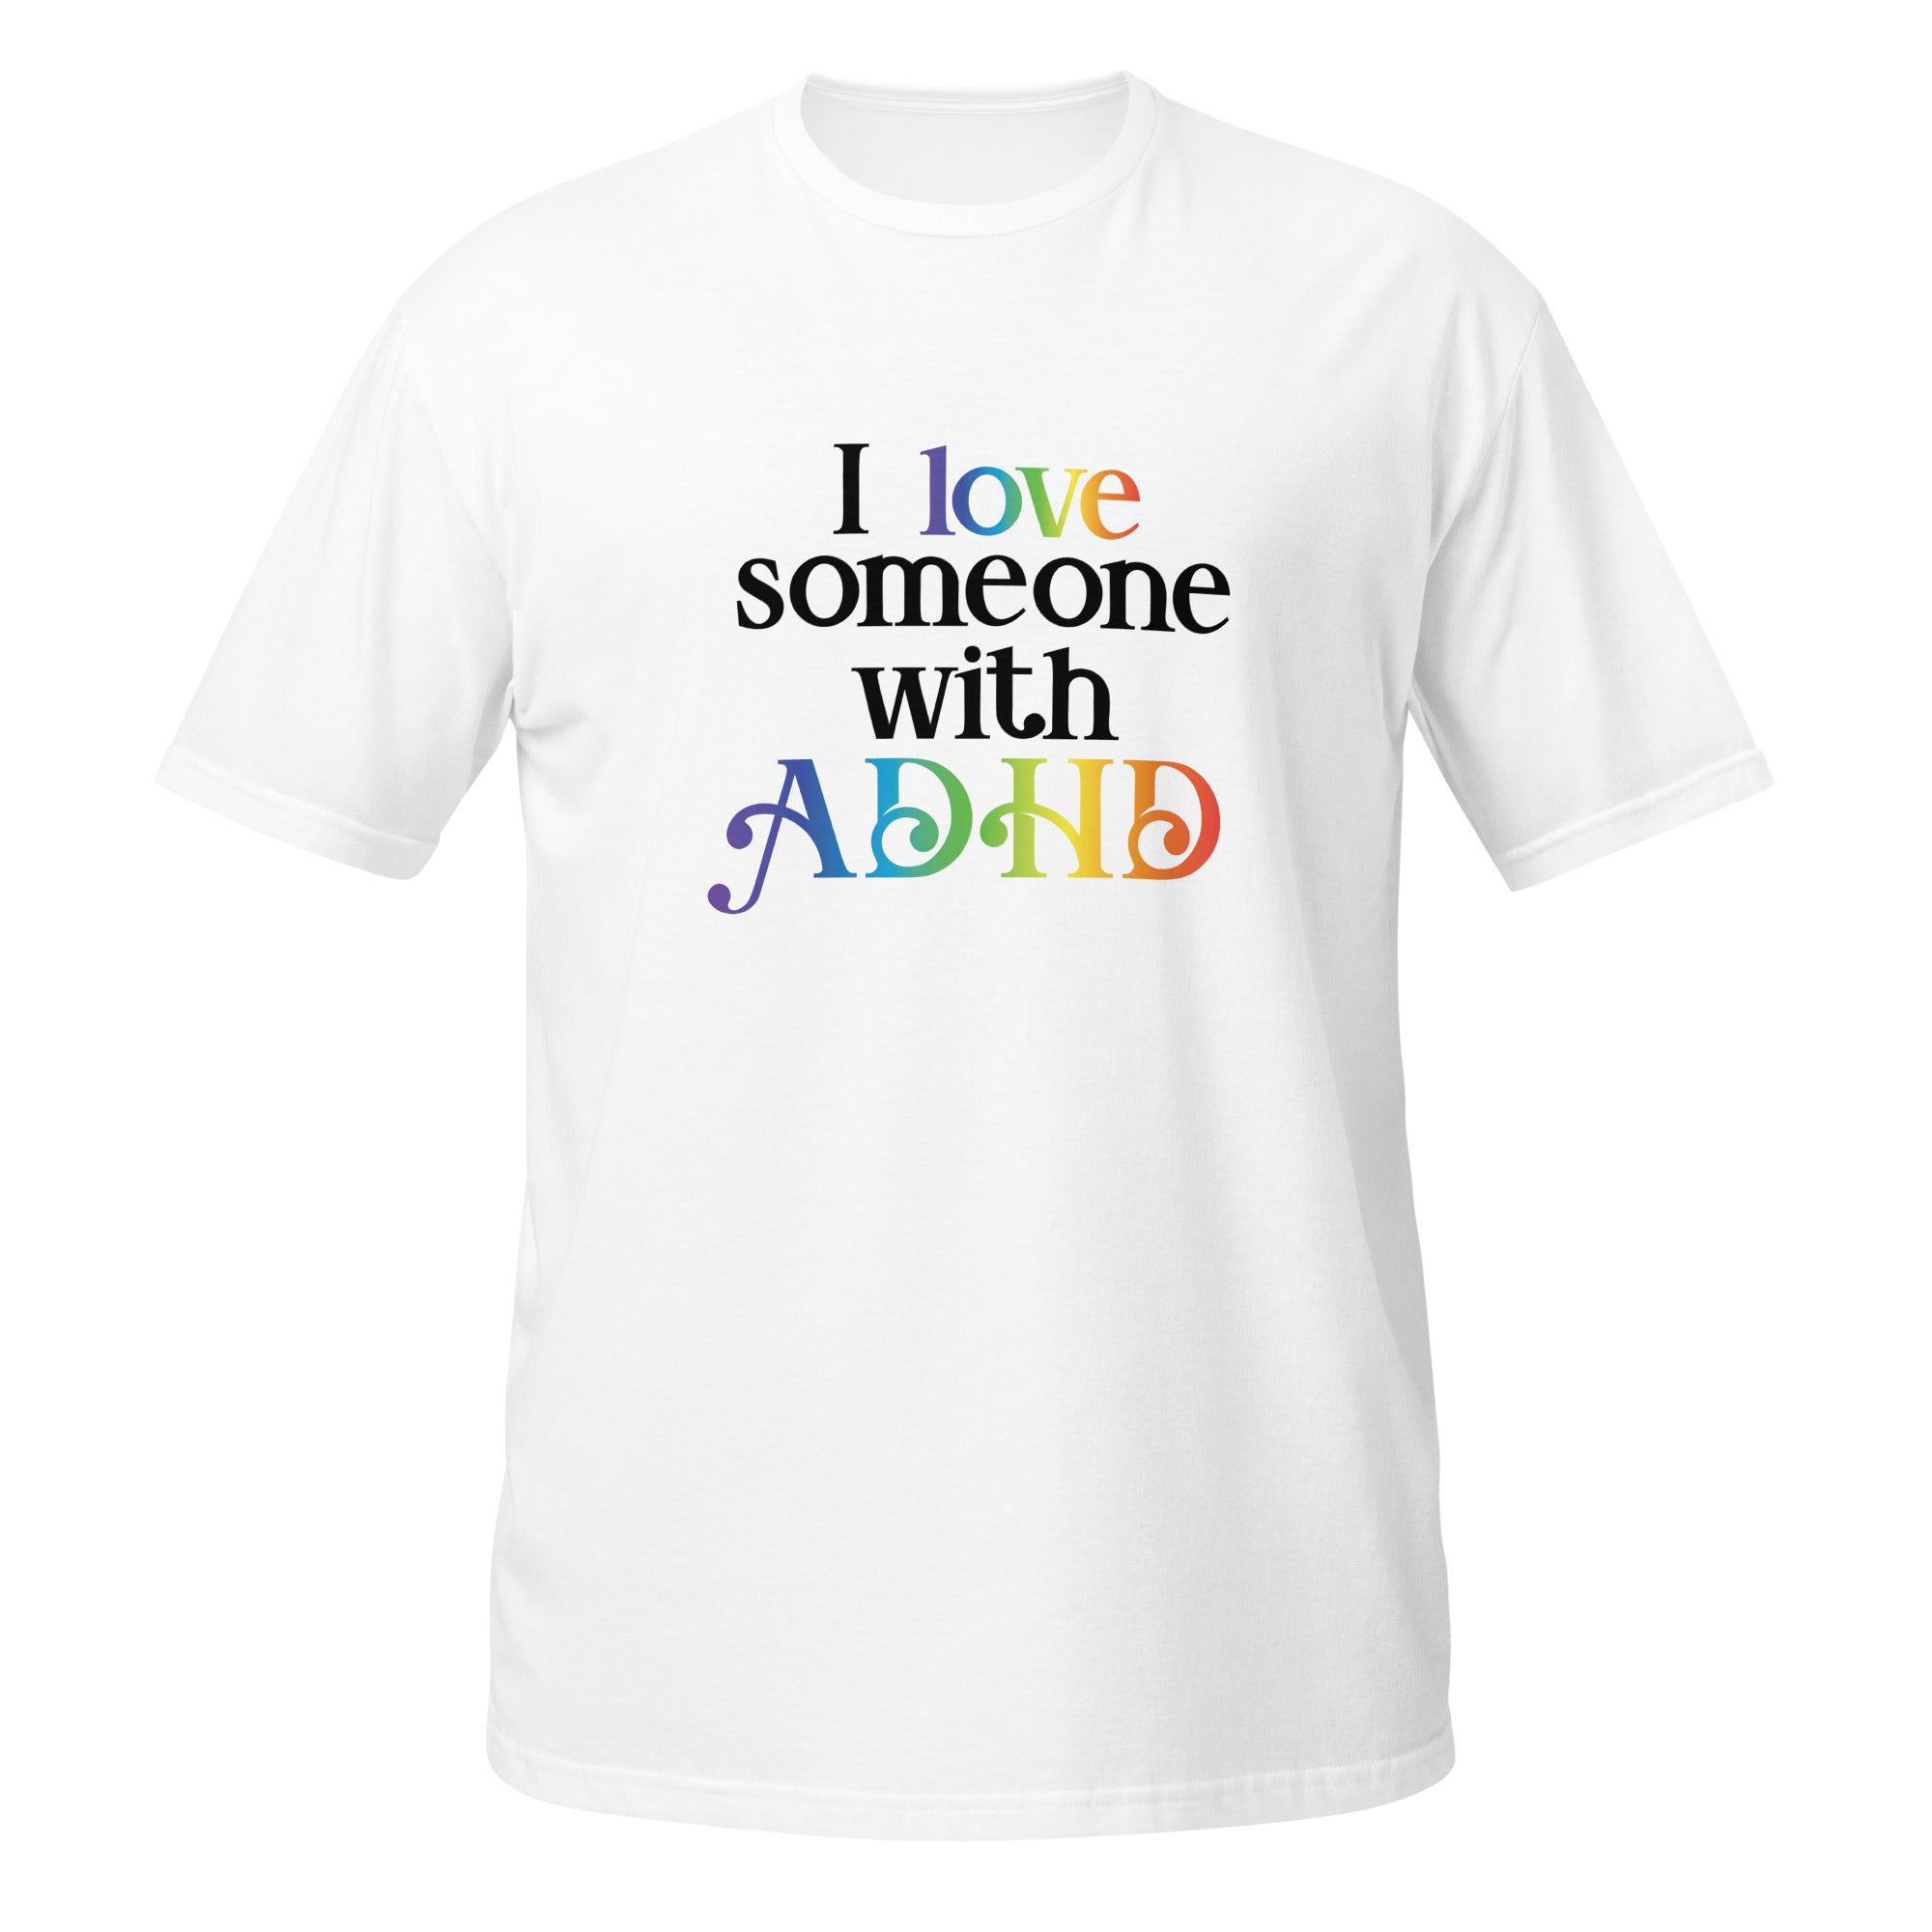 Short-Sleeve Unisex T-Shirt- ADHD- I Love Someone With ADHD